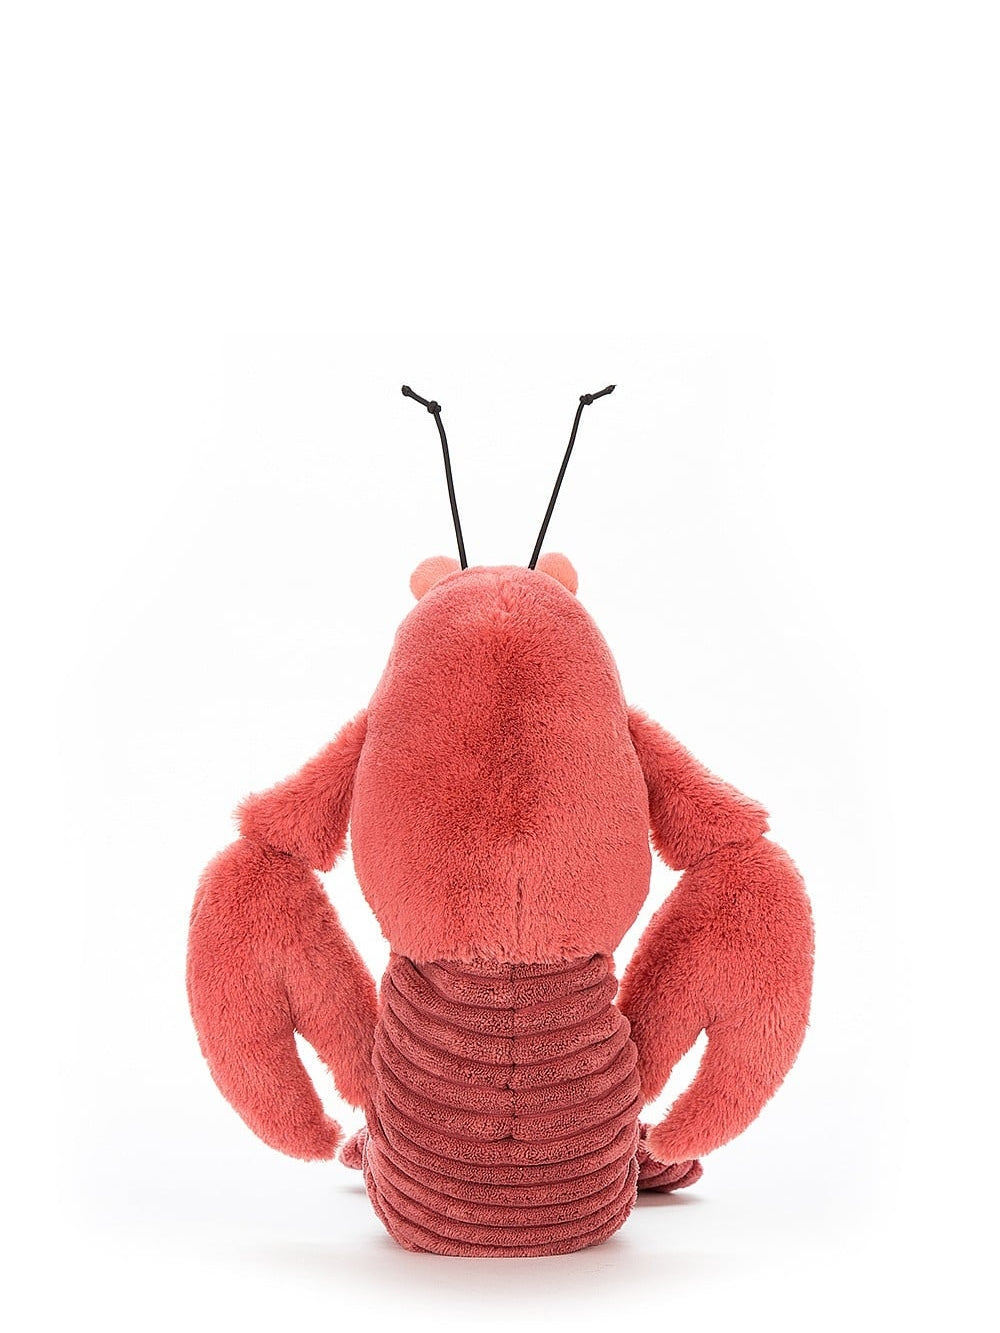 Larry Lobster, small